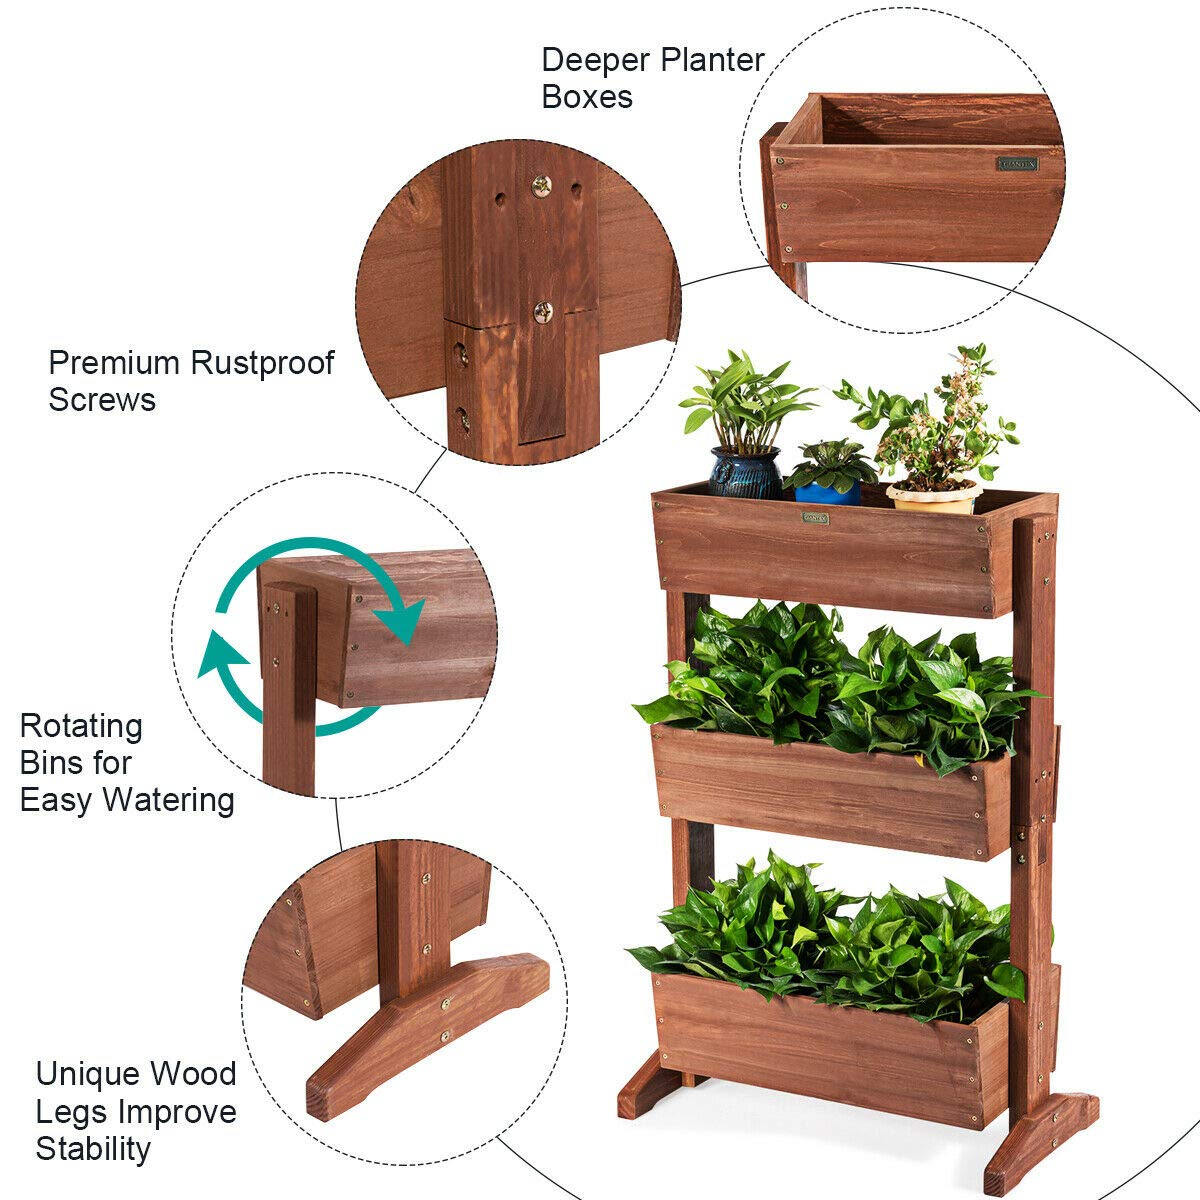 Giantex Classification Storage Box Shelf for Indoor Outdoor Flower Stand (Nut-brown)